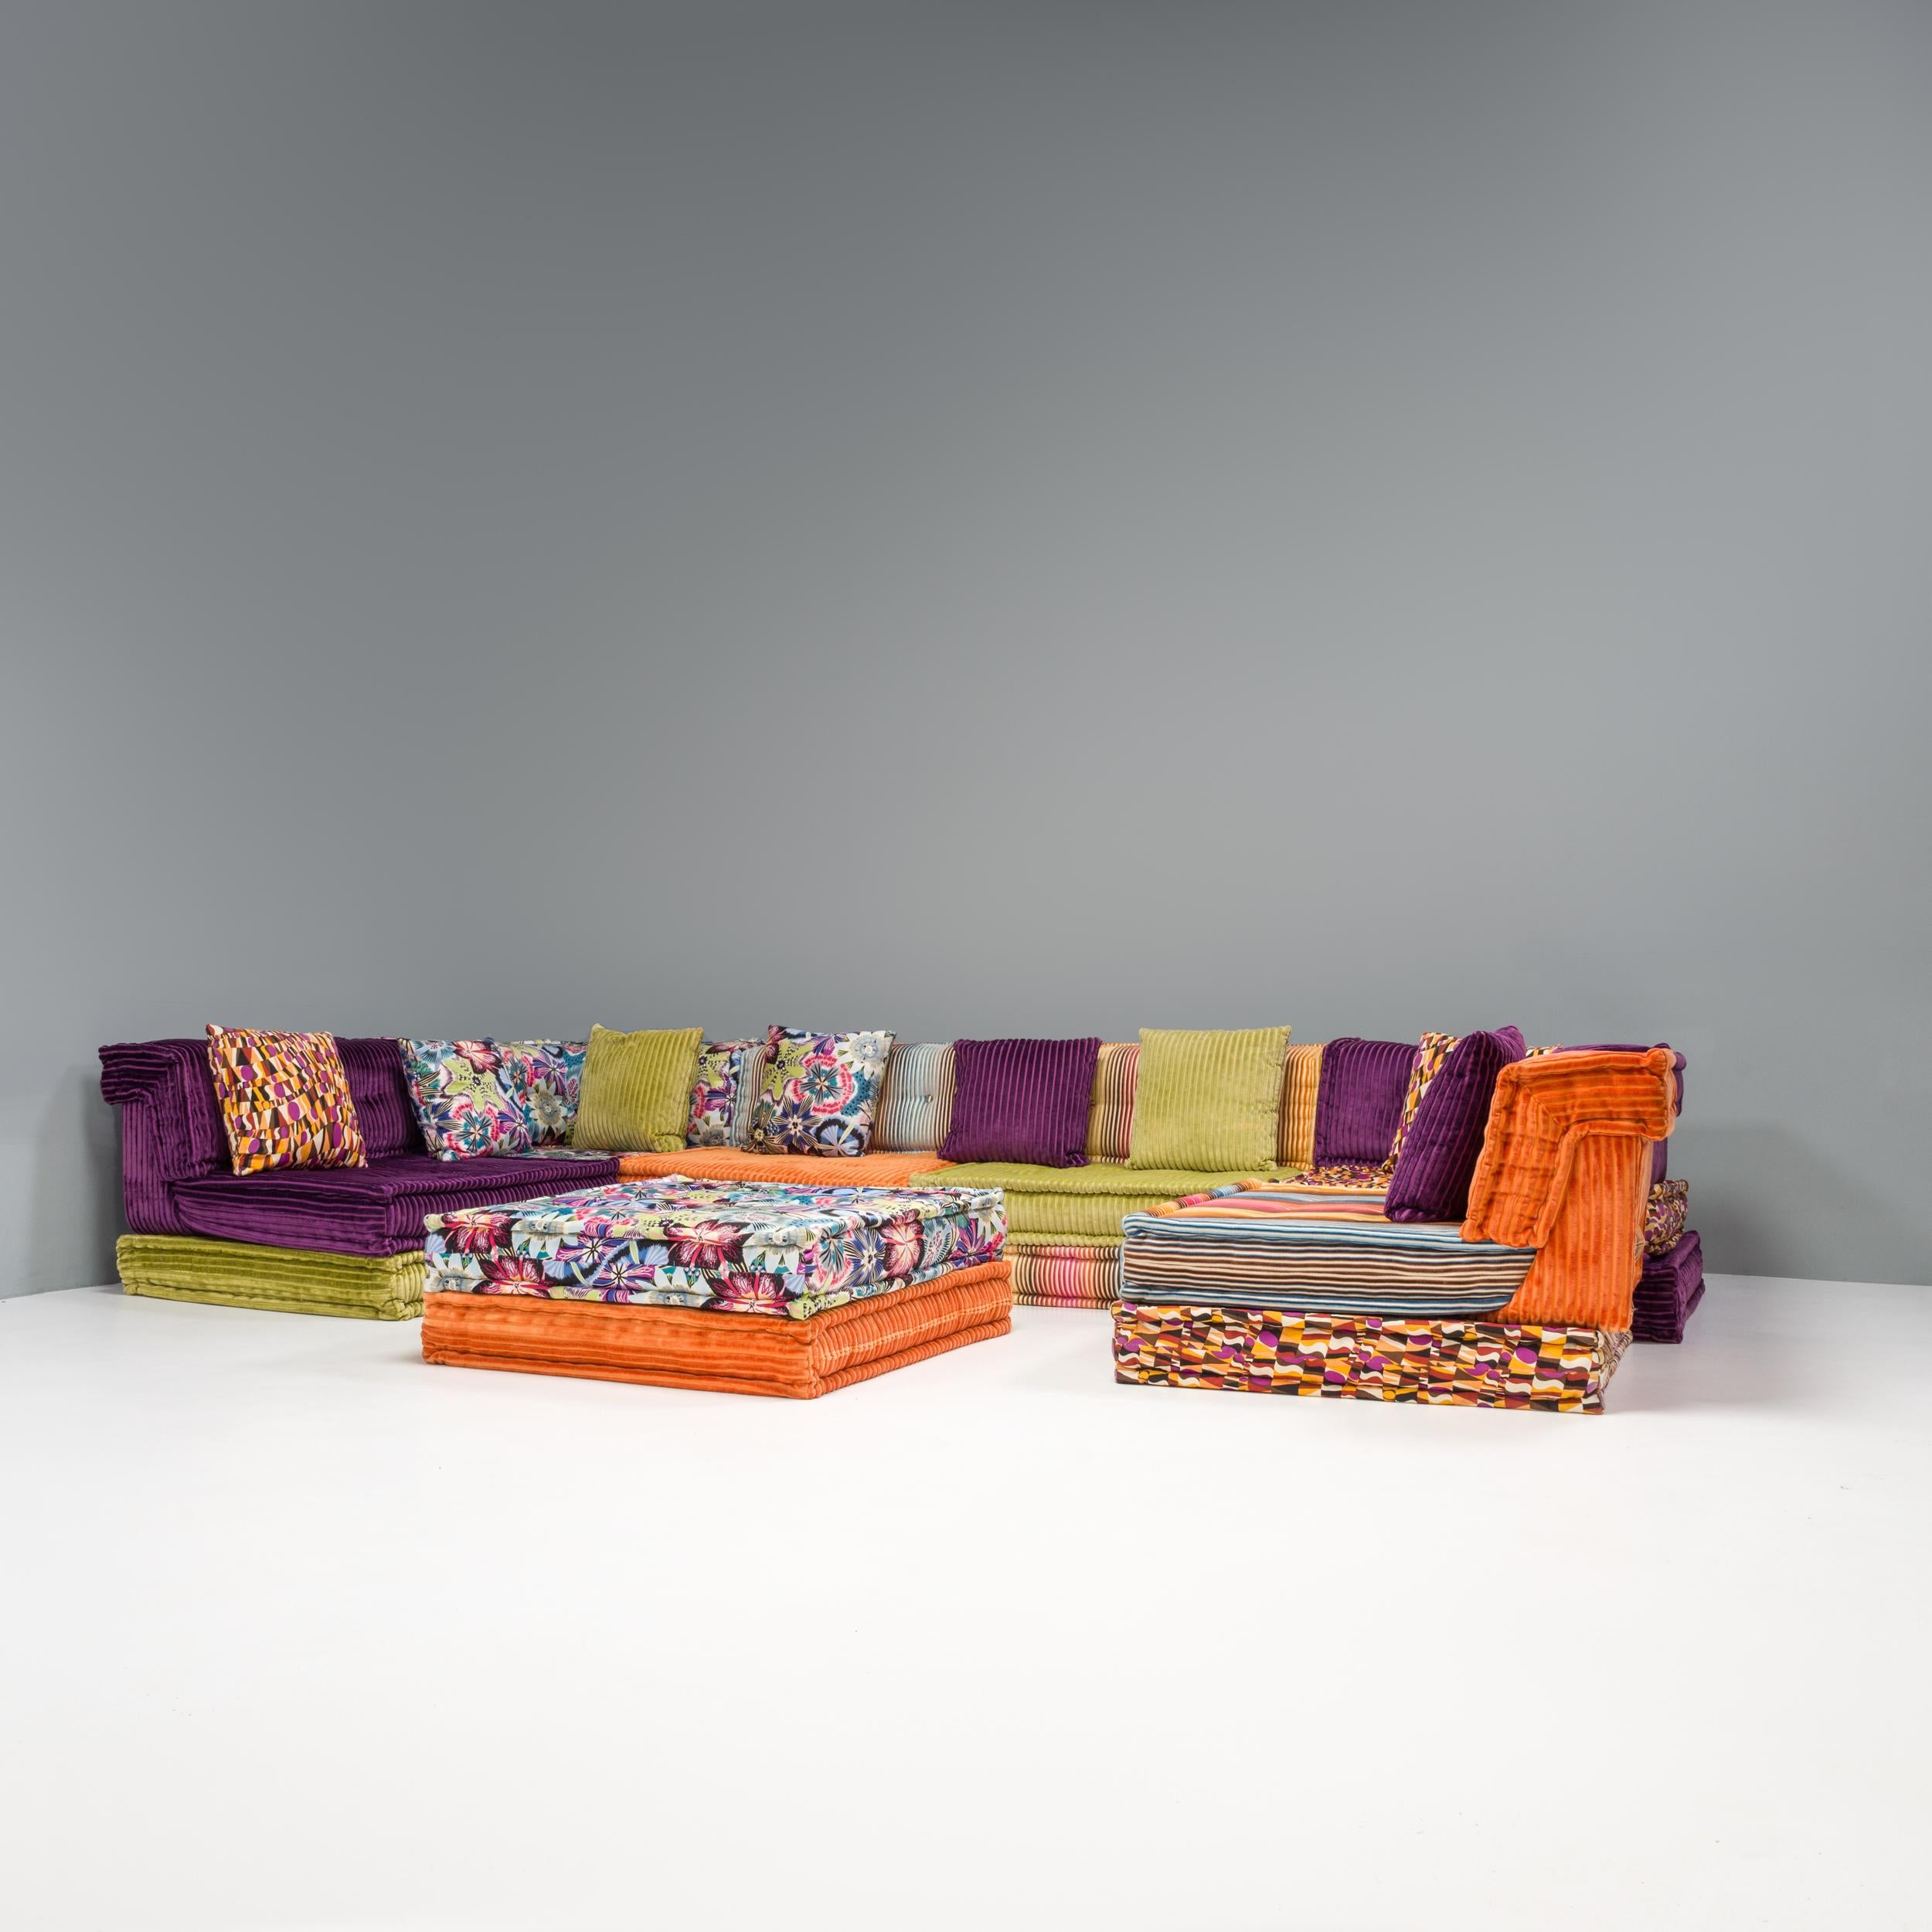 Originally designed by Hans Hopfer for Roche Bobois in 1971, the Mah Jong sofa has become a design classic.

Since its original conception, Roche Bobois has collaborated with a variety of design houses to upholster the sofa, bringing the design into